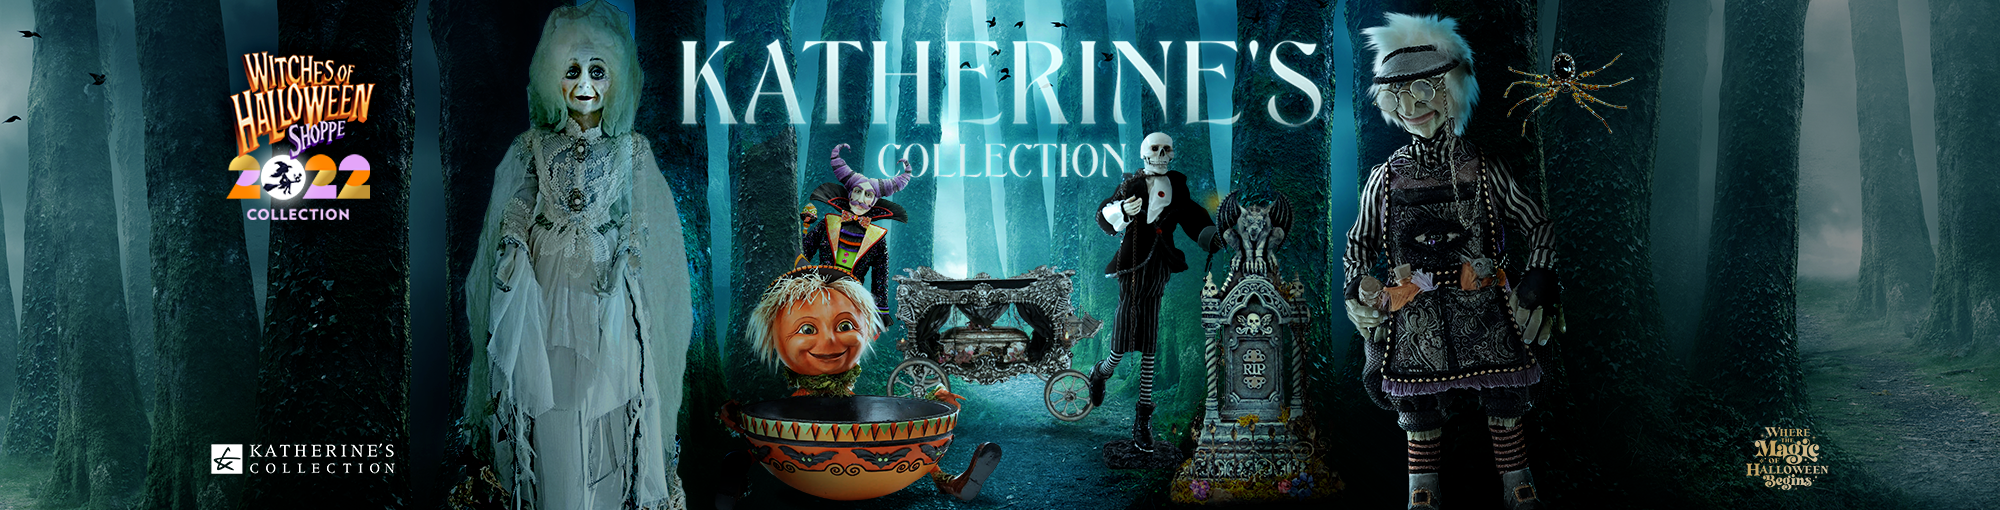 Boo-witching Katherine's Collection